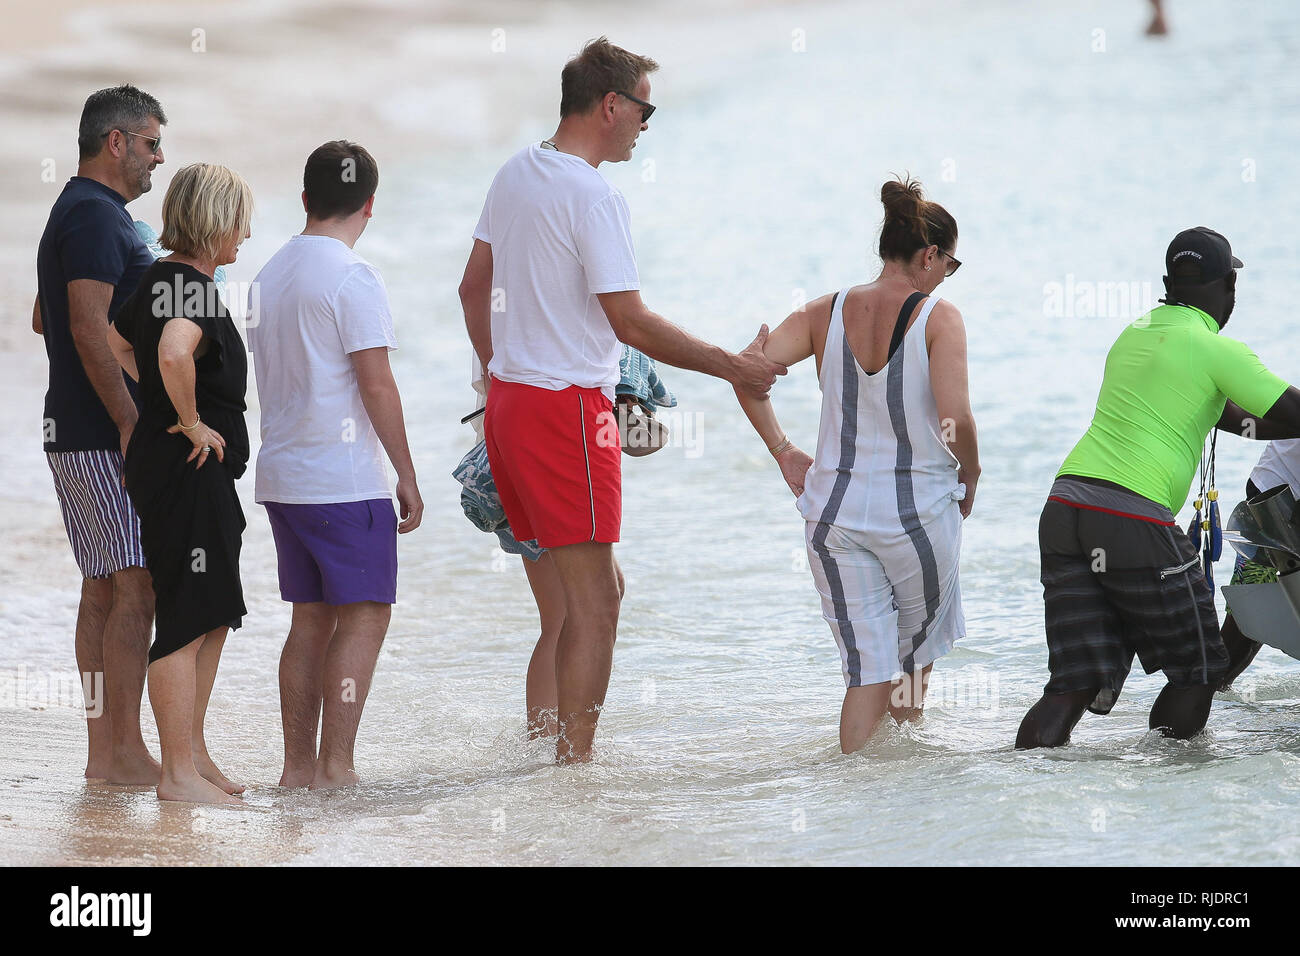 Dragon's Den star Peter Jones seen getting onto a boat with his wife Tara Capp and friends.  Featuring: Peter Jones, Tara Capp Where: Barbados, Barbados When: 05 Jan 2019 Credit: WENN.com Stock Photo